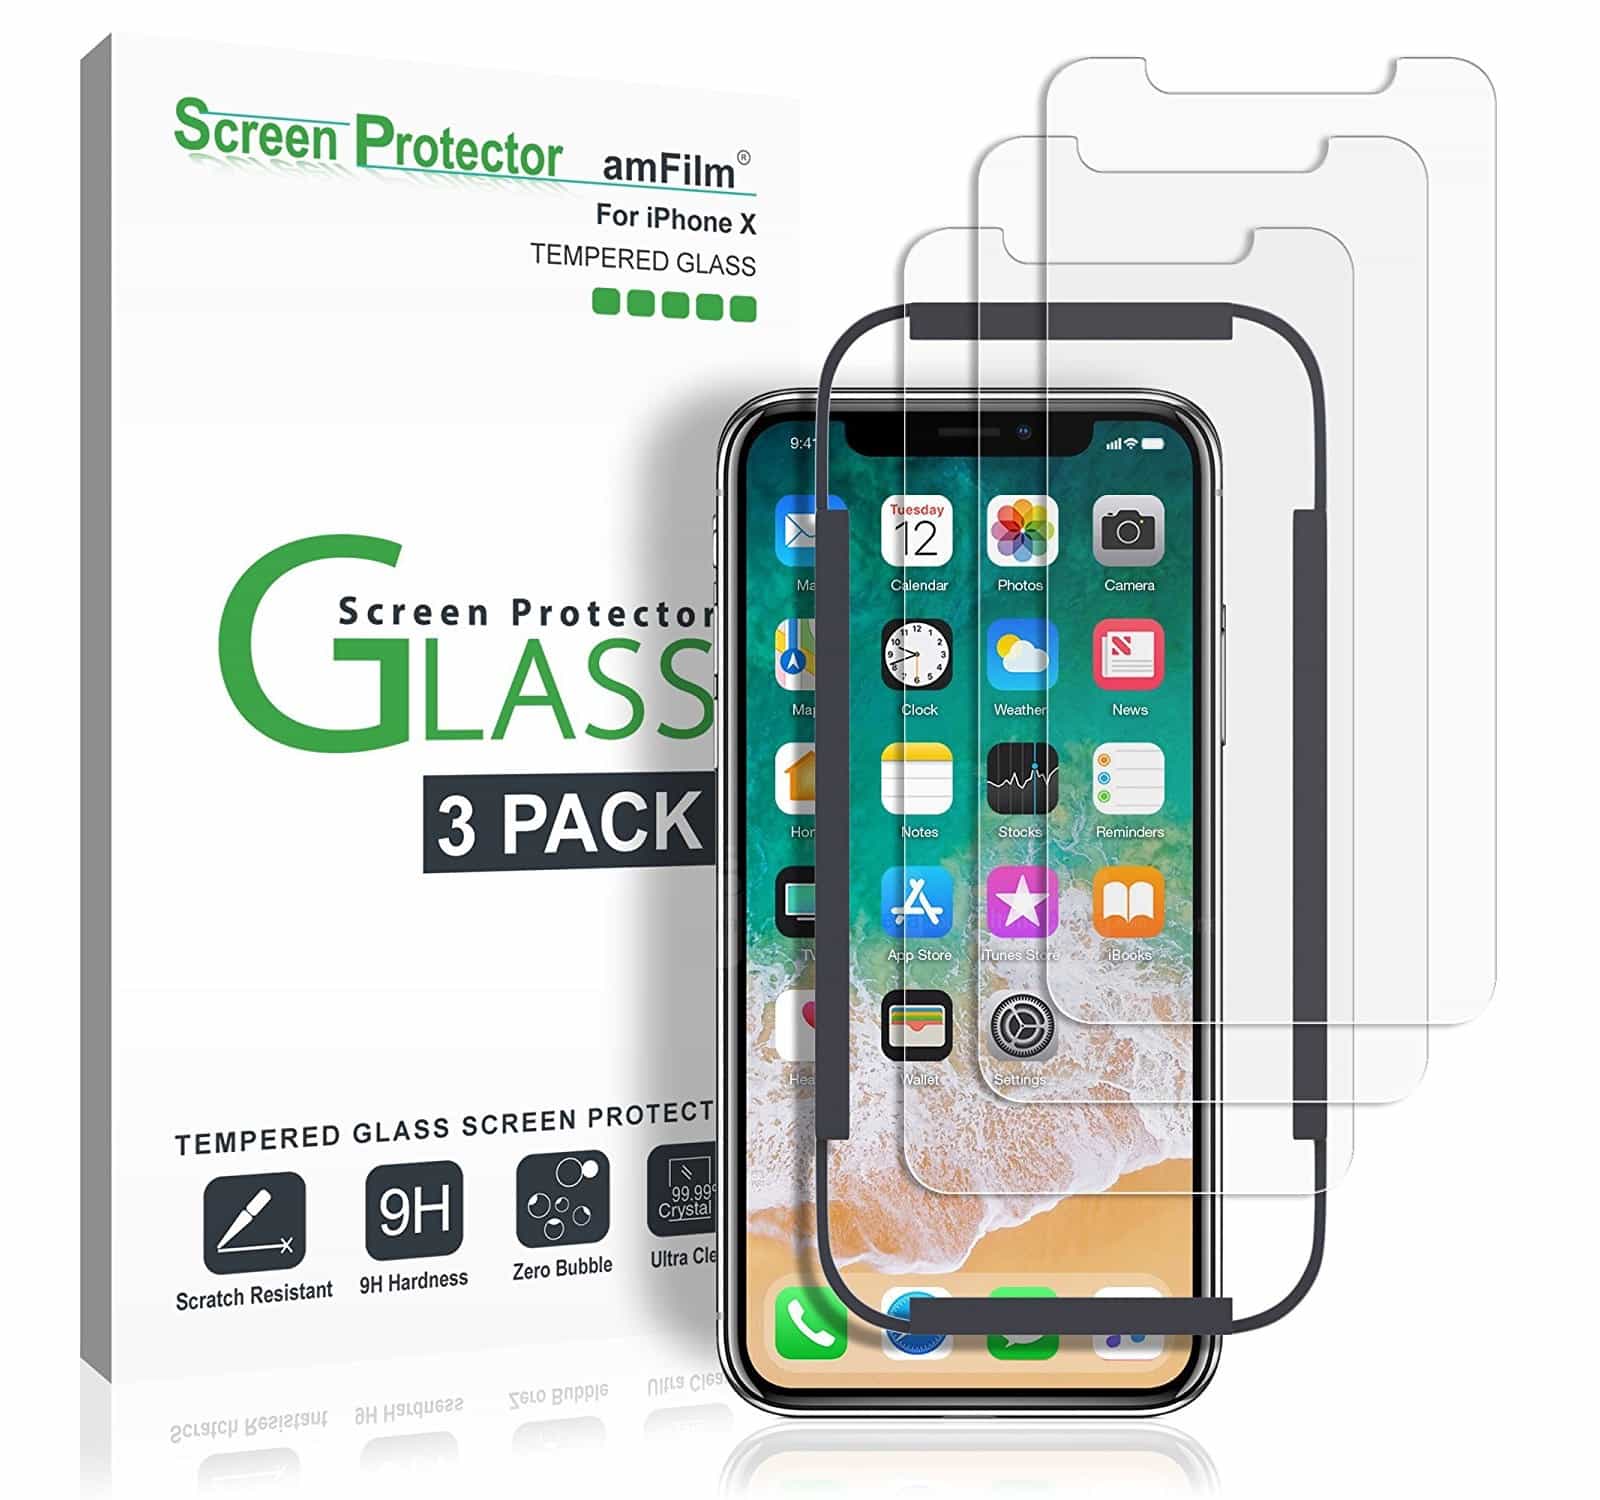 The TechMatte amFilm iPhone X screen protector fits perfectly, and is very hard to scratch.